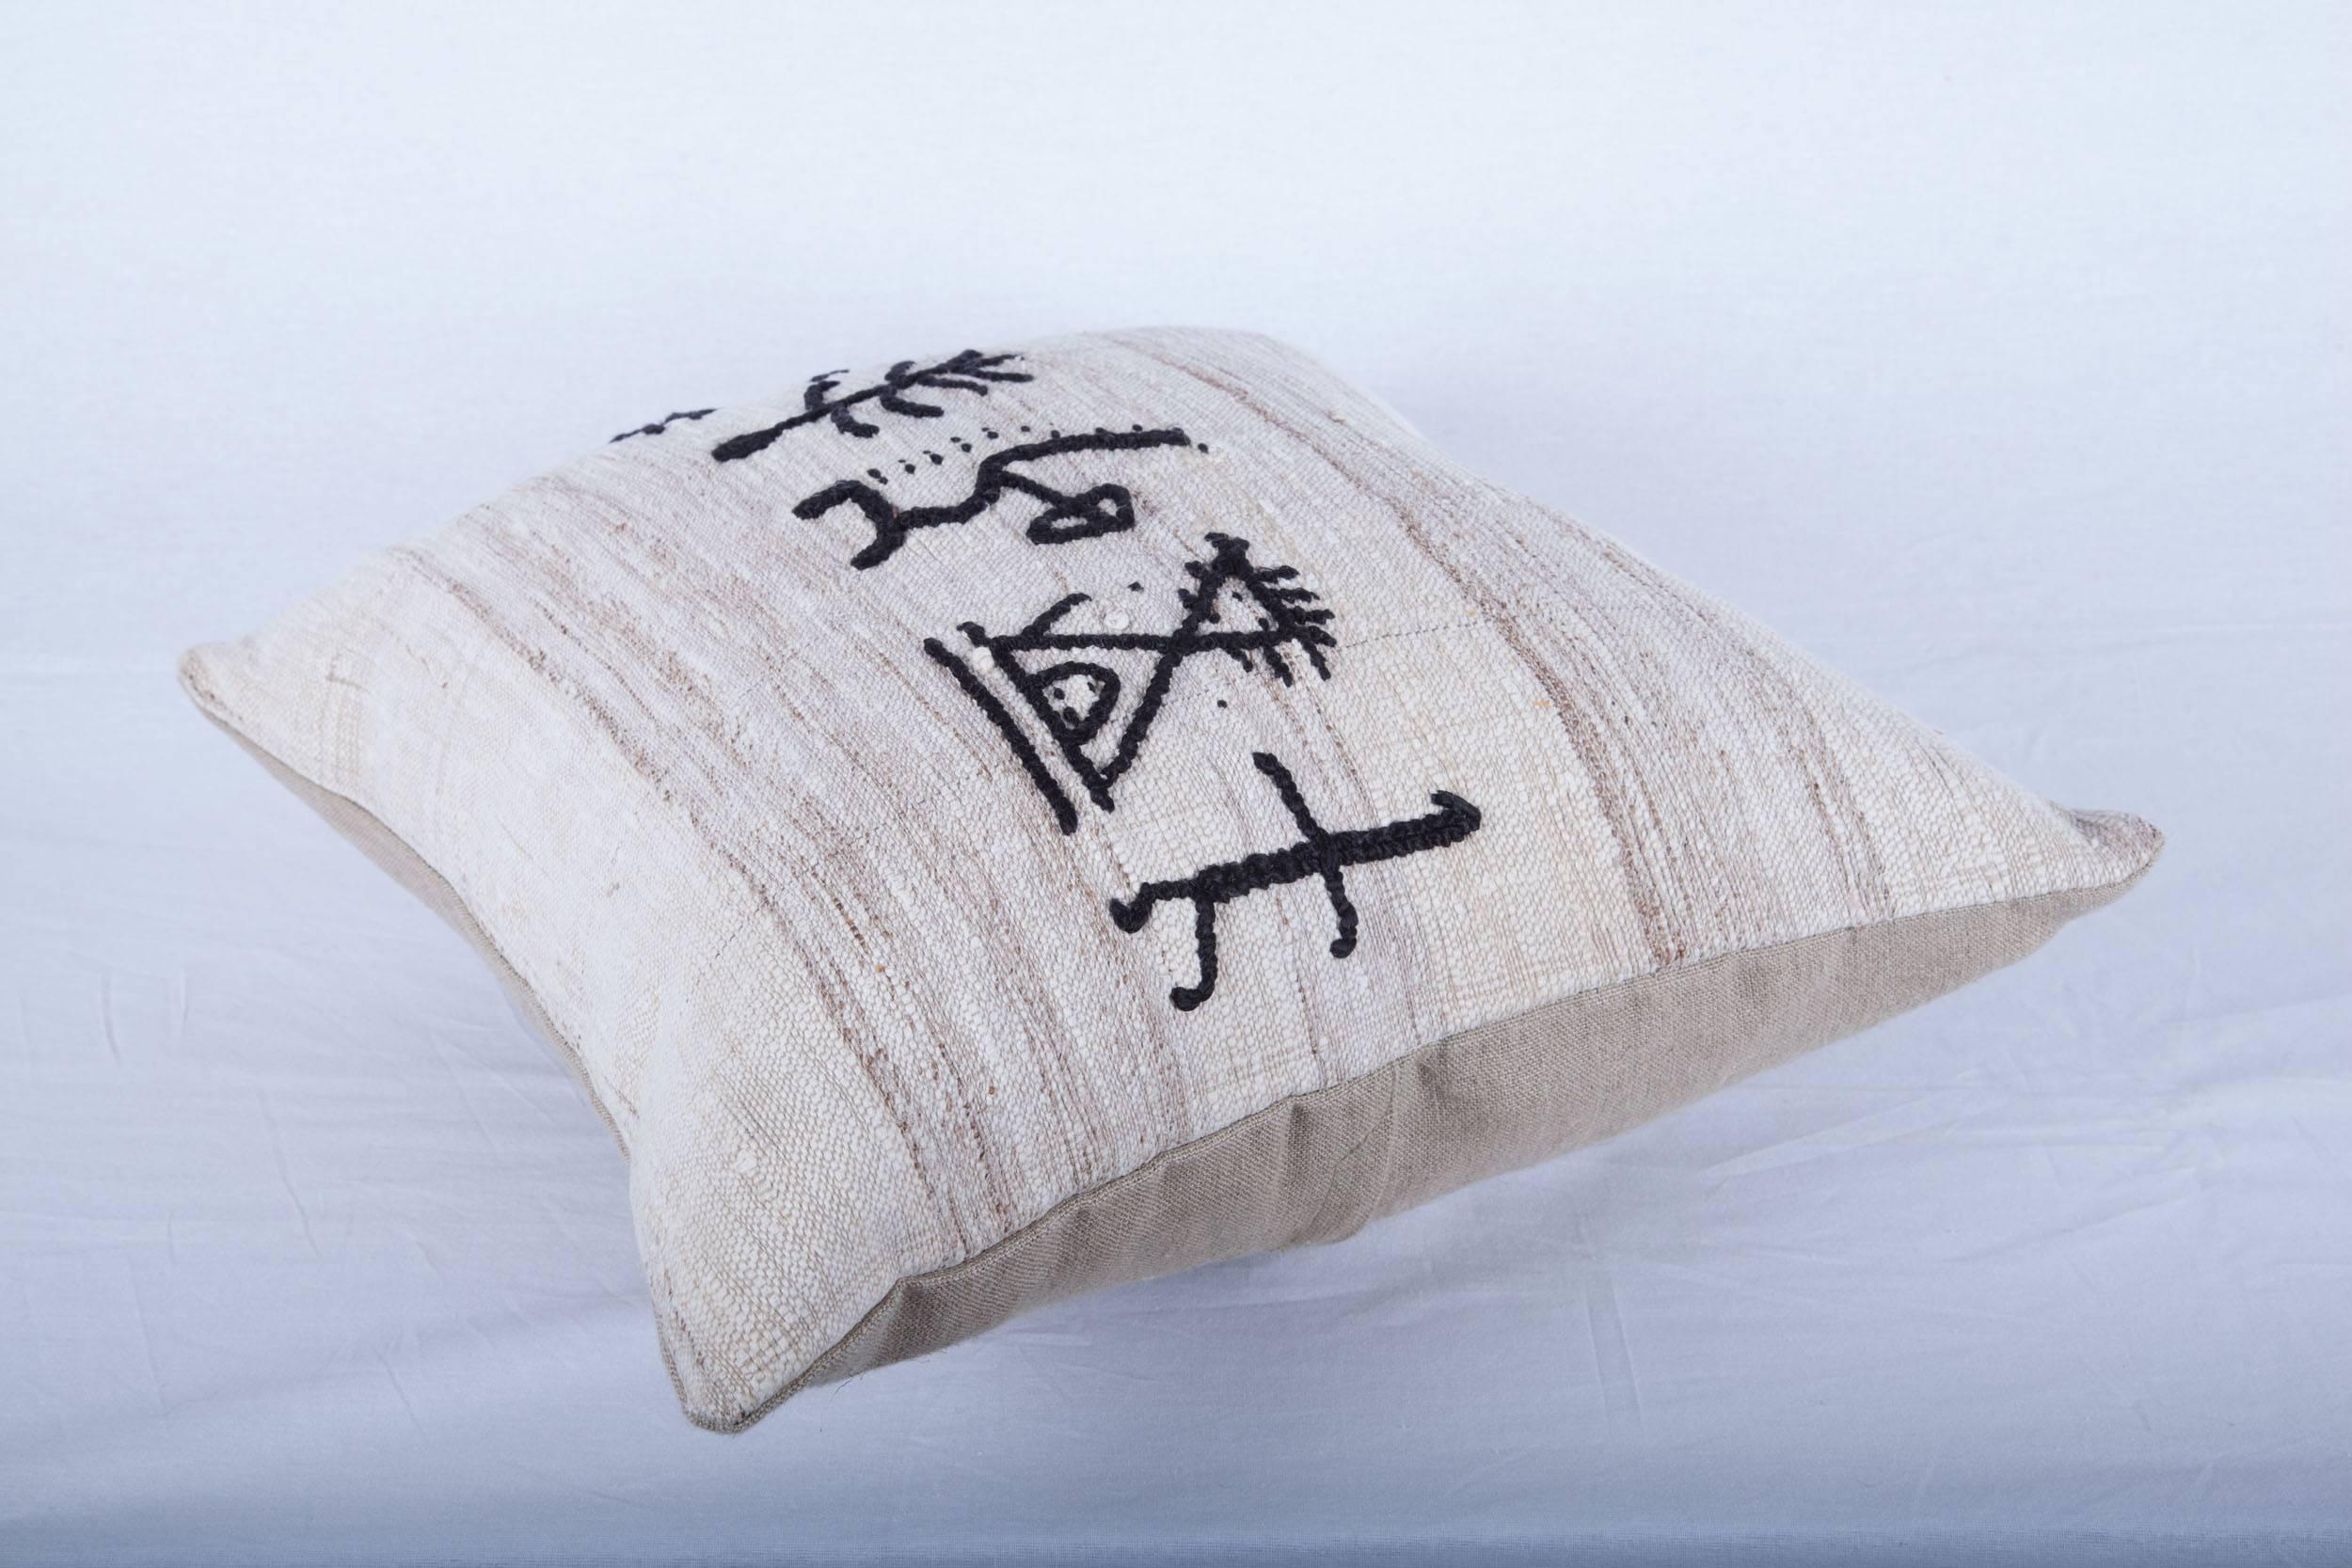 Contemporary Pillow with a New Design on a Vintage Anatolian Nomadic Kilim, by Seref Ozen